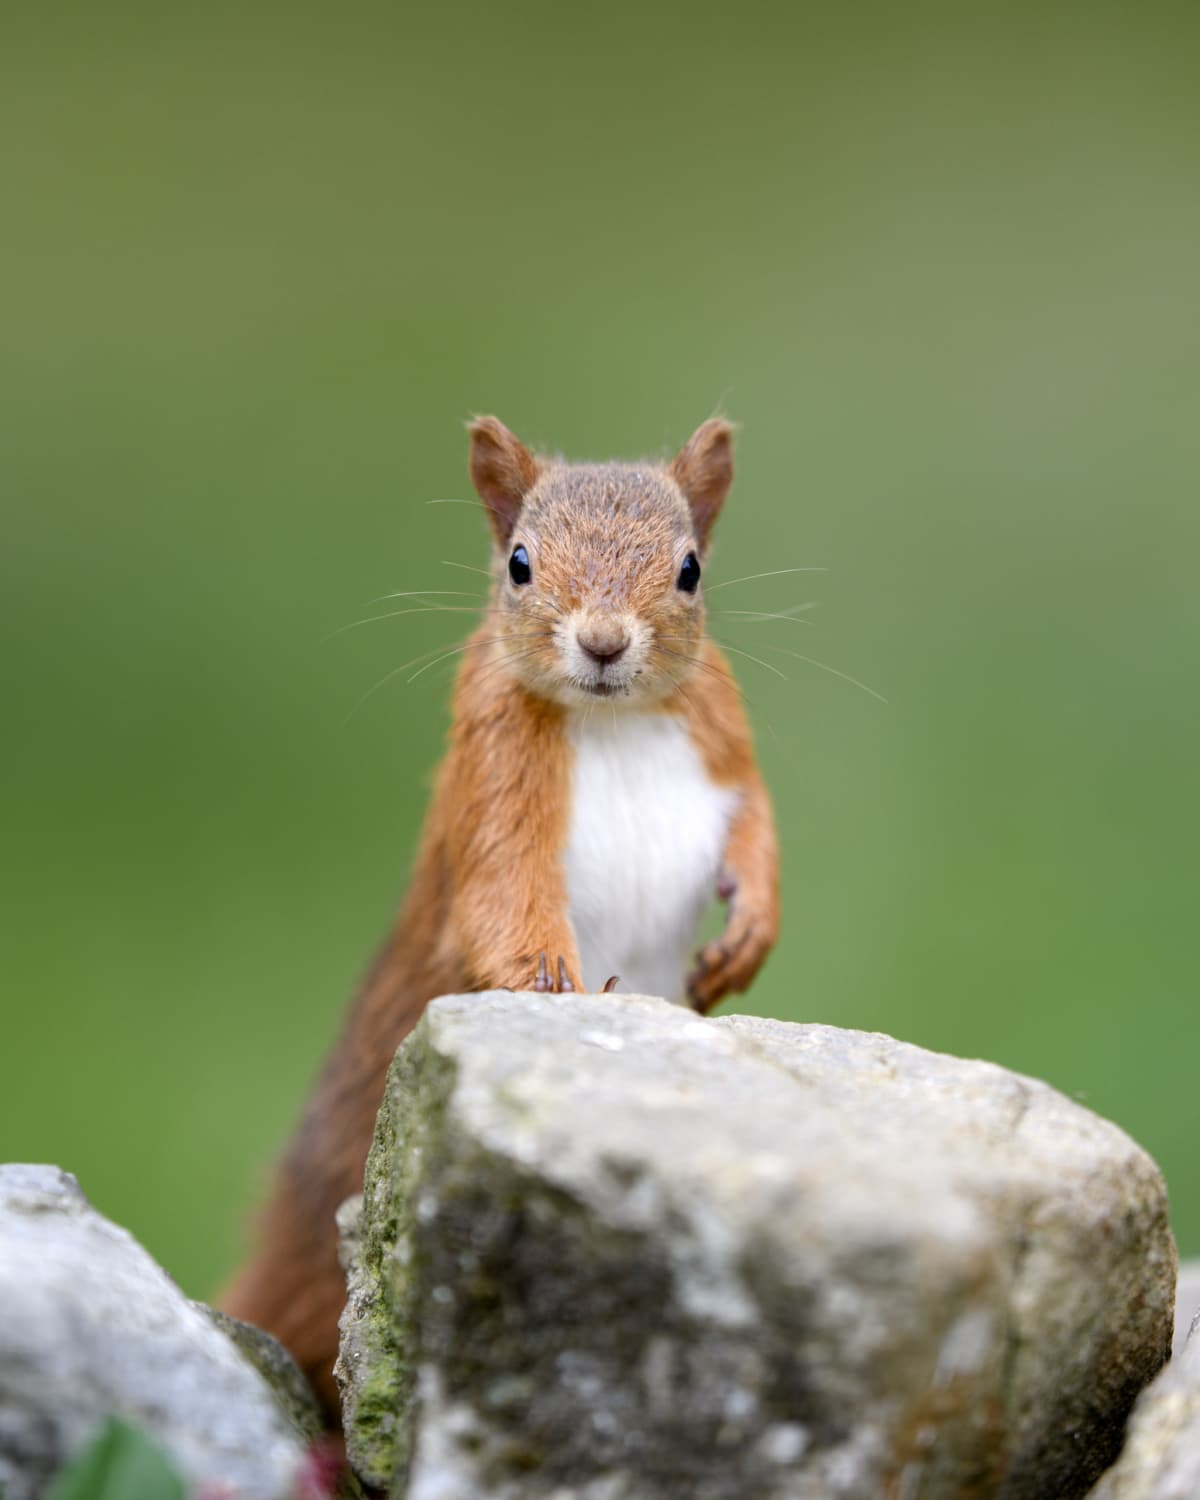 Eurasian red squirrel looking over a rock